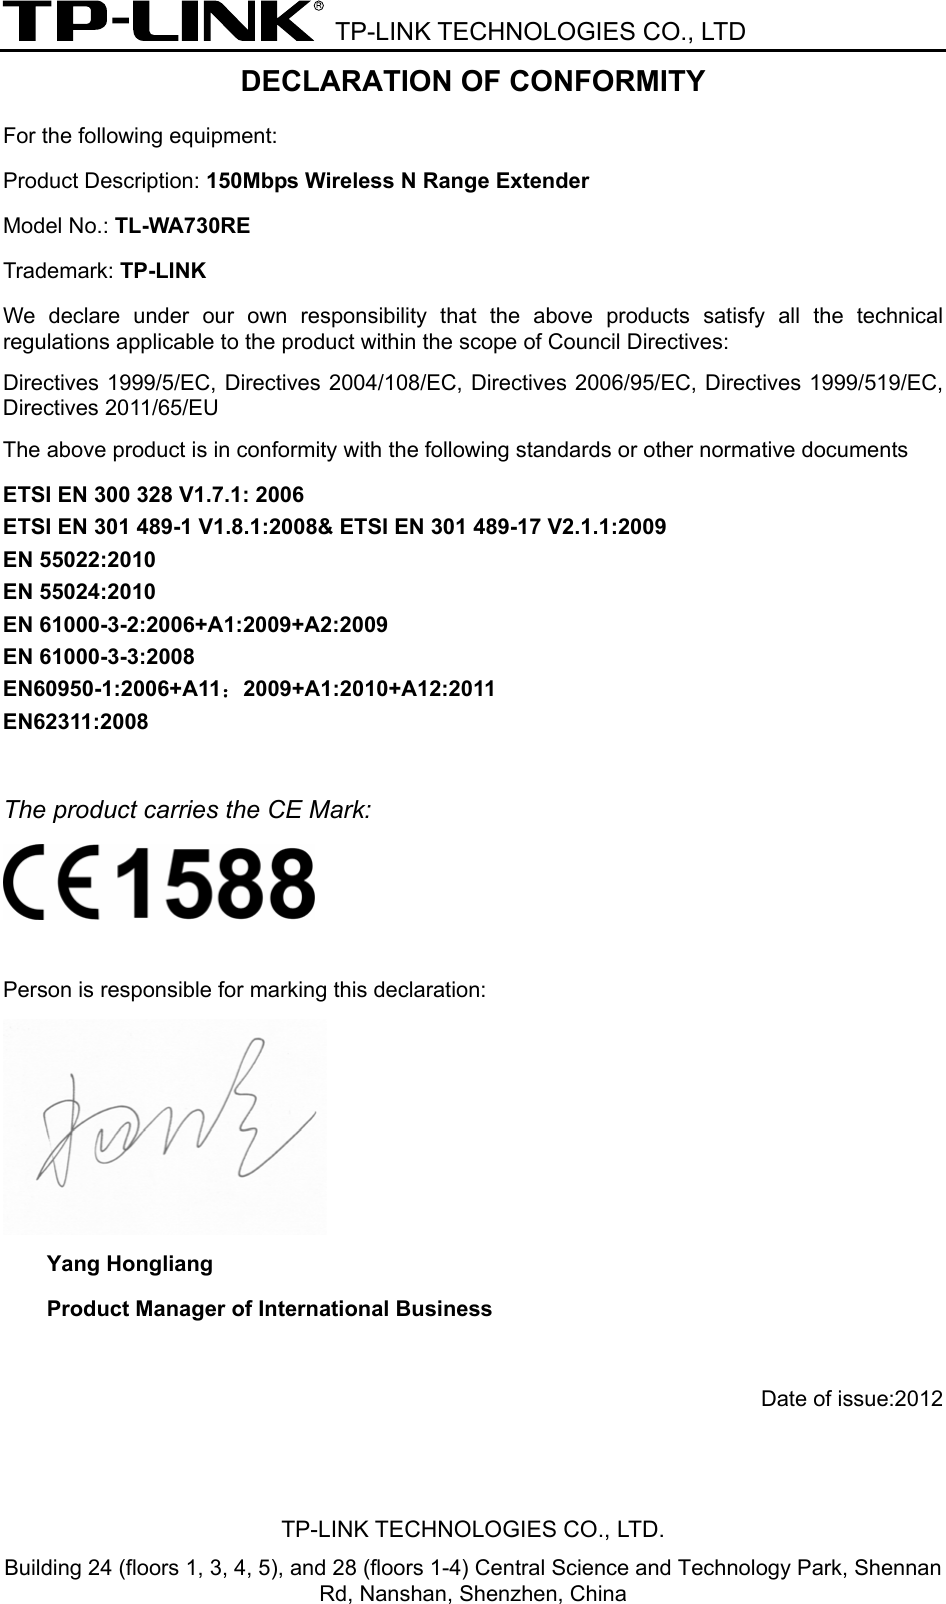  TP-LINK TECHNOLOGIES CO., LTD DECLARATION OF CONFORMITY For the following equipment: Product Description: 150Mbps Wireless N Range Extender Model No.: TL-WA730RE Trademark: TP-LINK We declare under our own responsibility that the above products satisfy all the technical regulations applicable to the product within the scope of Council Directives:     Directives 1999/5/EC, Directives 2004/108/EC, Directives 2006/95/EC, Directives 1999/519/EC, Directives 2011/65/EU The above product is in conformity with the following standards or other normative documents ETSI EN 300 328 V1.7.1: 2006 ETSI EN 301 489-1 V1.8.1:2008&amp; ETSI EN 301 489-17 V2.1.1:2009 EN 55022:2010 EN 55024:2010 EN 61000-3-2:2006+A1:2009+A2:2009 EN 61000-3-3:2008 EN60950-1:2006+A11：2009+A1:2010+A12:2011 EN62311:2008  The product carries the CE Mark:   Person is responsible for marking this declaration:  Yang Hongliang Product Manager of International Business   Date of issue:2012 TP-LINK TECHNOLOGIES CO., LTD. Building 24 (floors 1, 3, 4, 5), and 28 (floors 1-4) Central Science and Technology Park, Shennan Rd, Nanshan, Shenzhen, China 